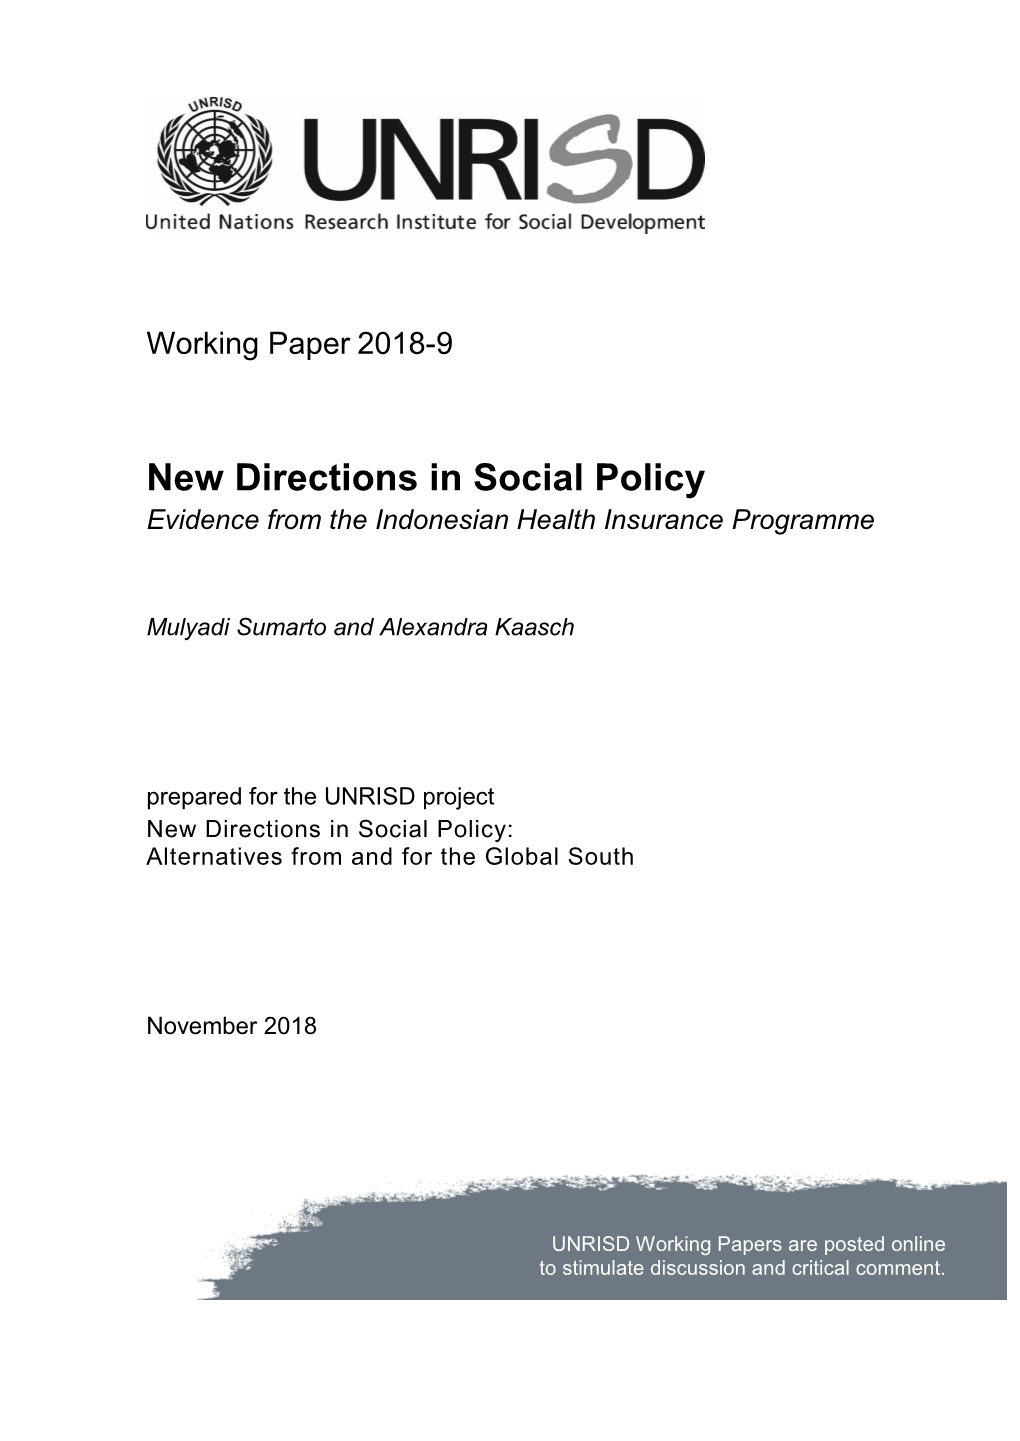 Evidence from the Indonesian Health Insurance Programme